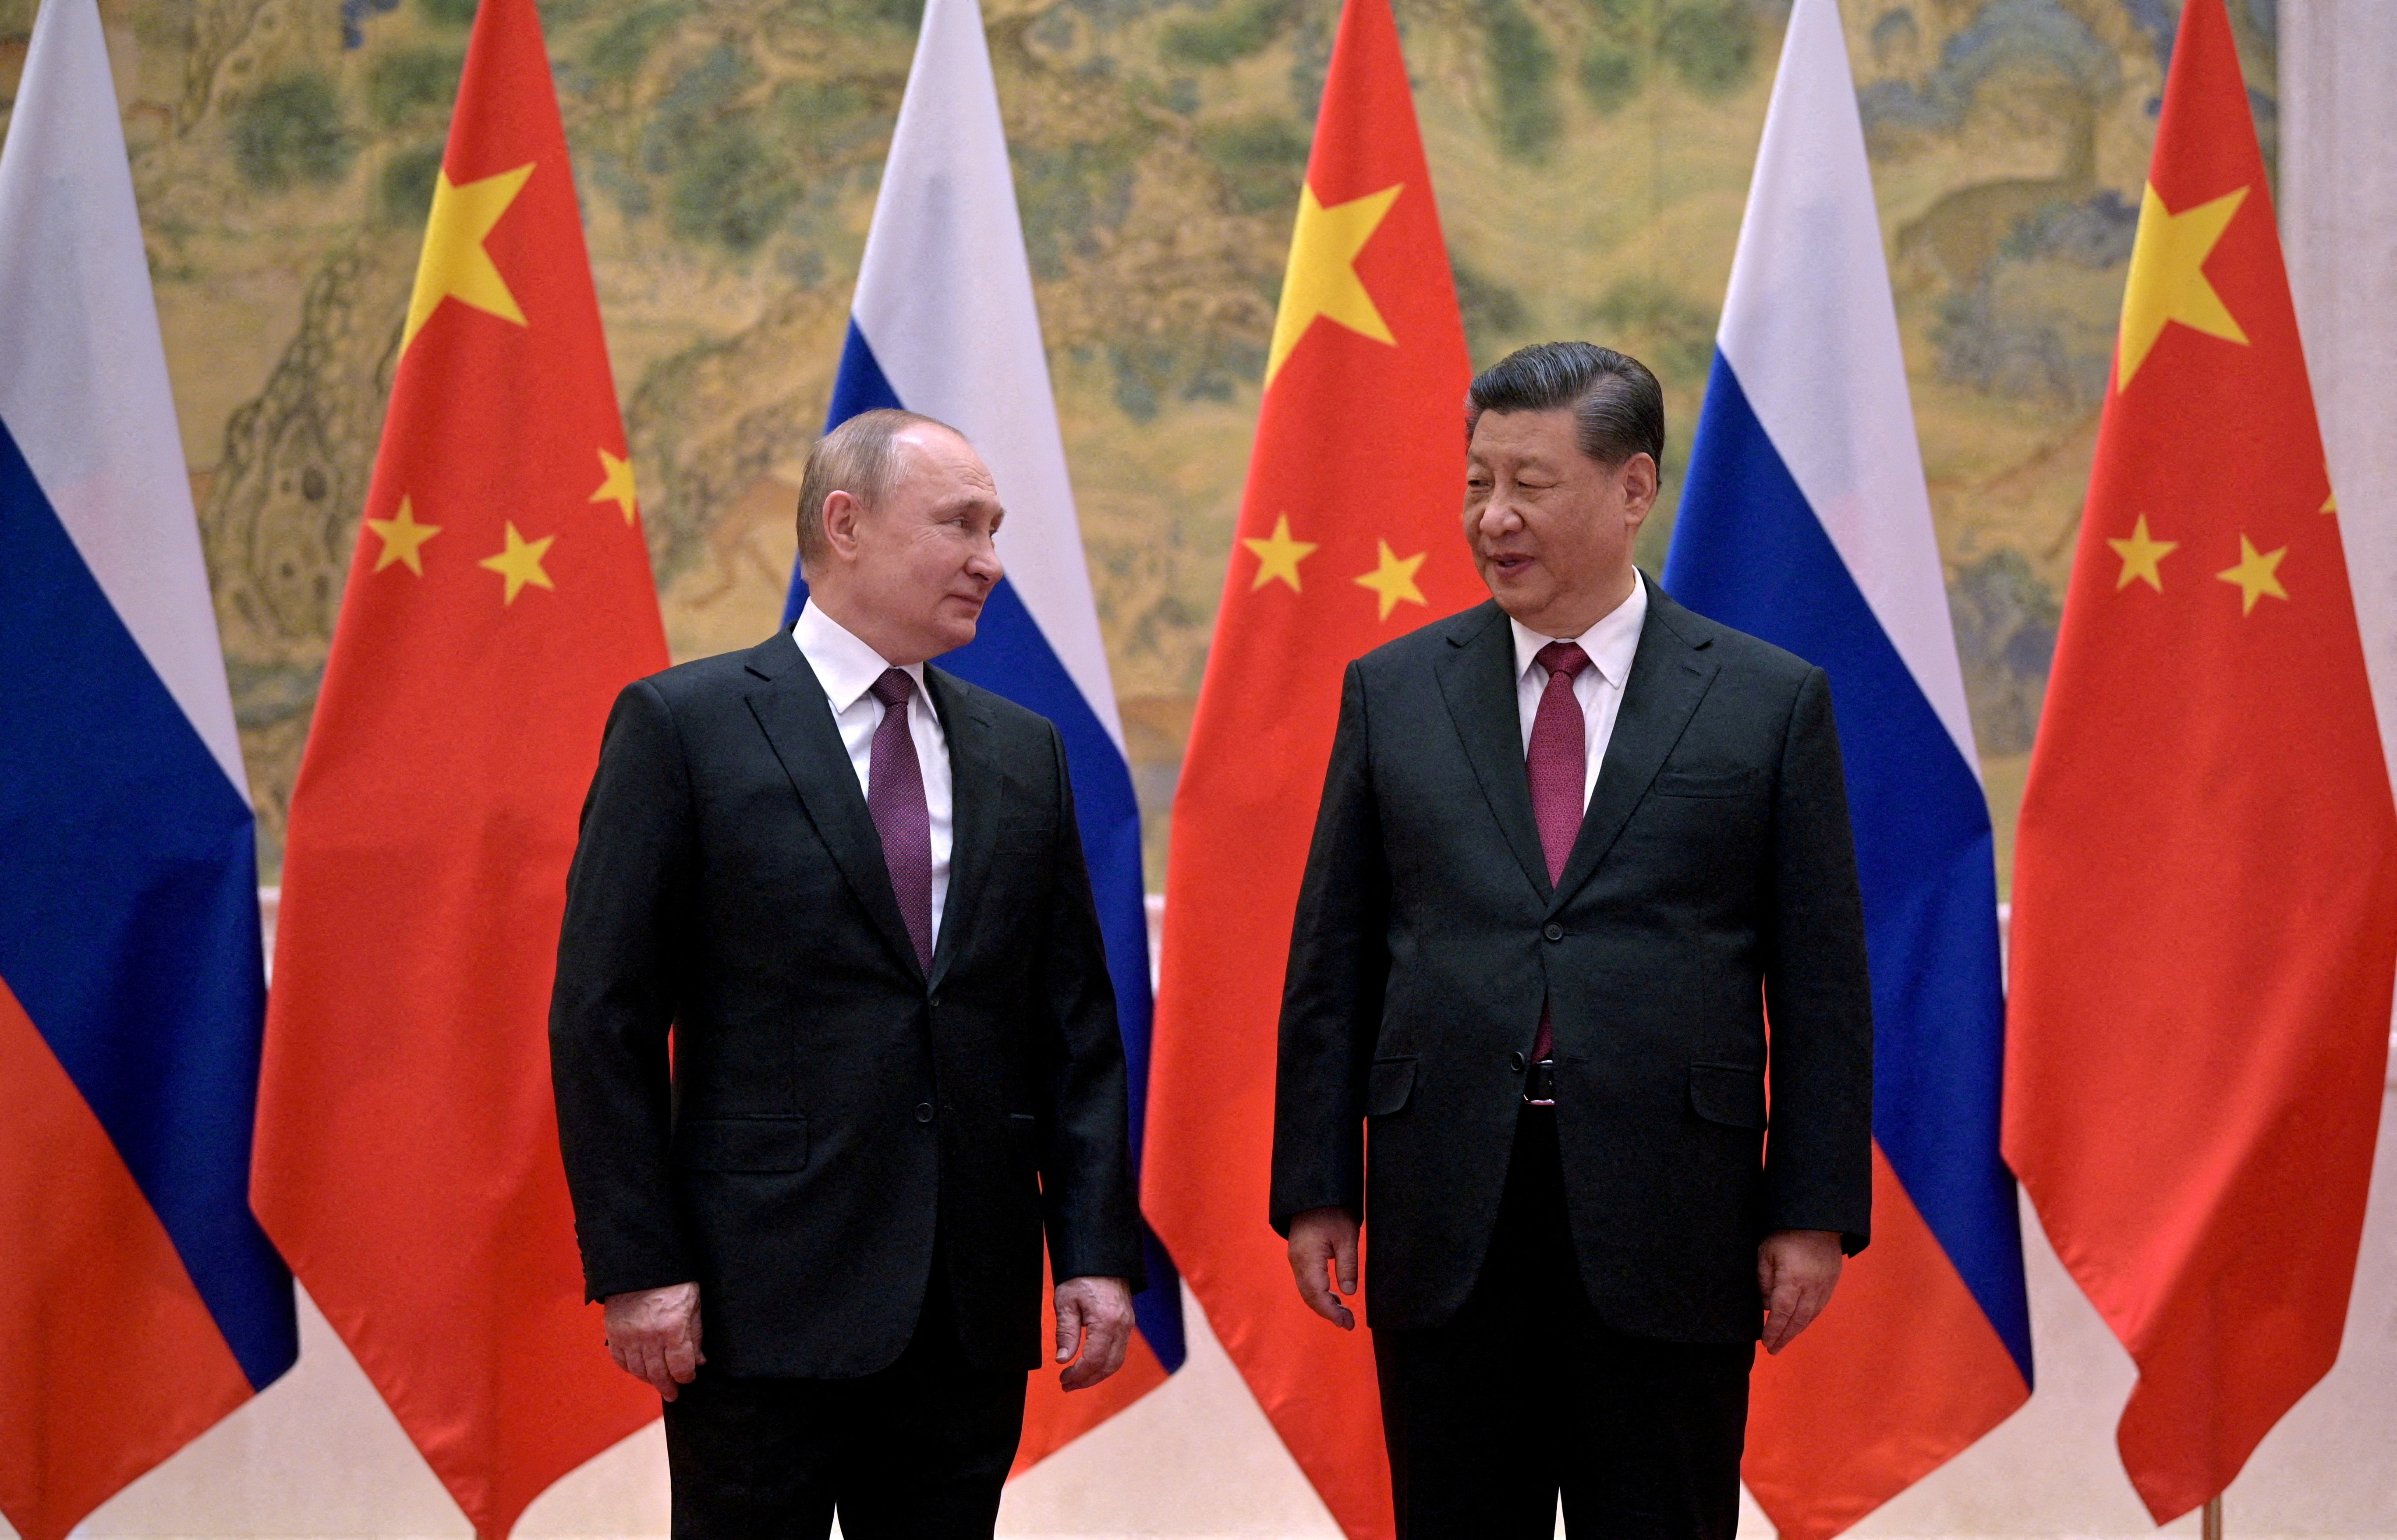 Russian President Vladimir Putin attends a meeting with Chinese President Xi Jinping